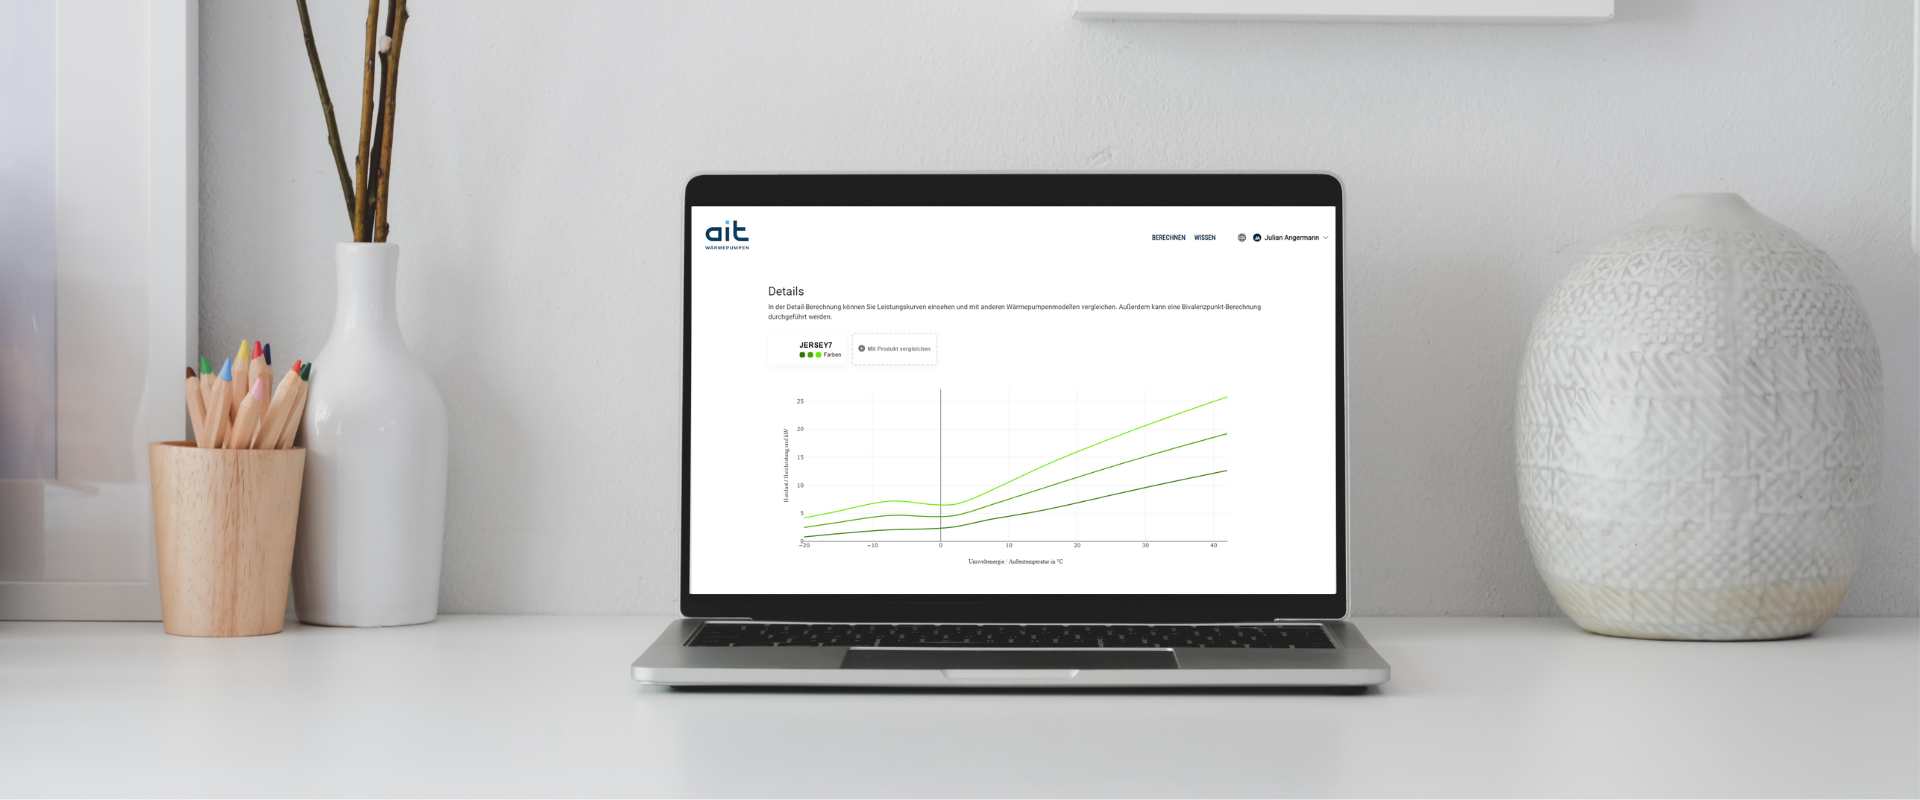 An opened laptop on a table shows a curve diagram on the myait-website about the performance of the heat pump Jersey. On its left there is a cup with colored pencils and a vase on the right side.